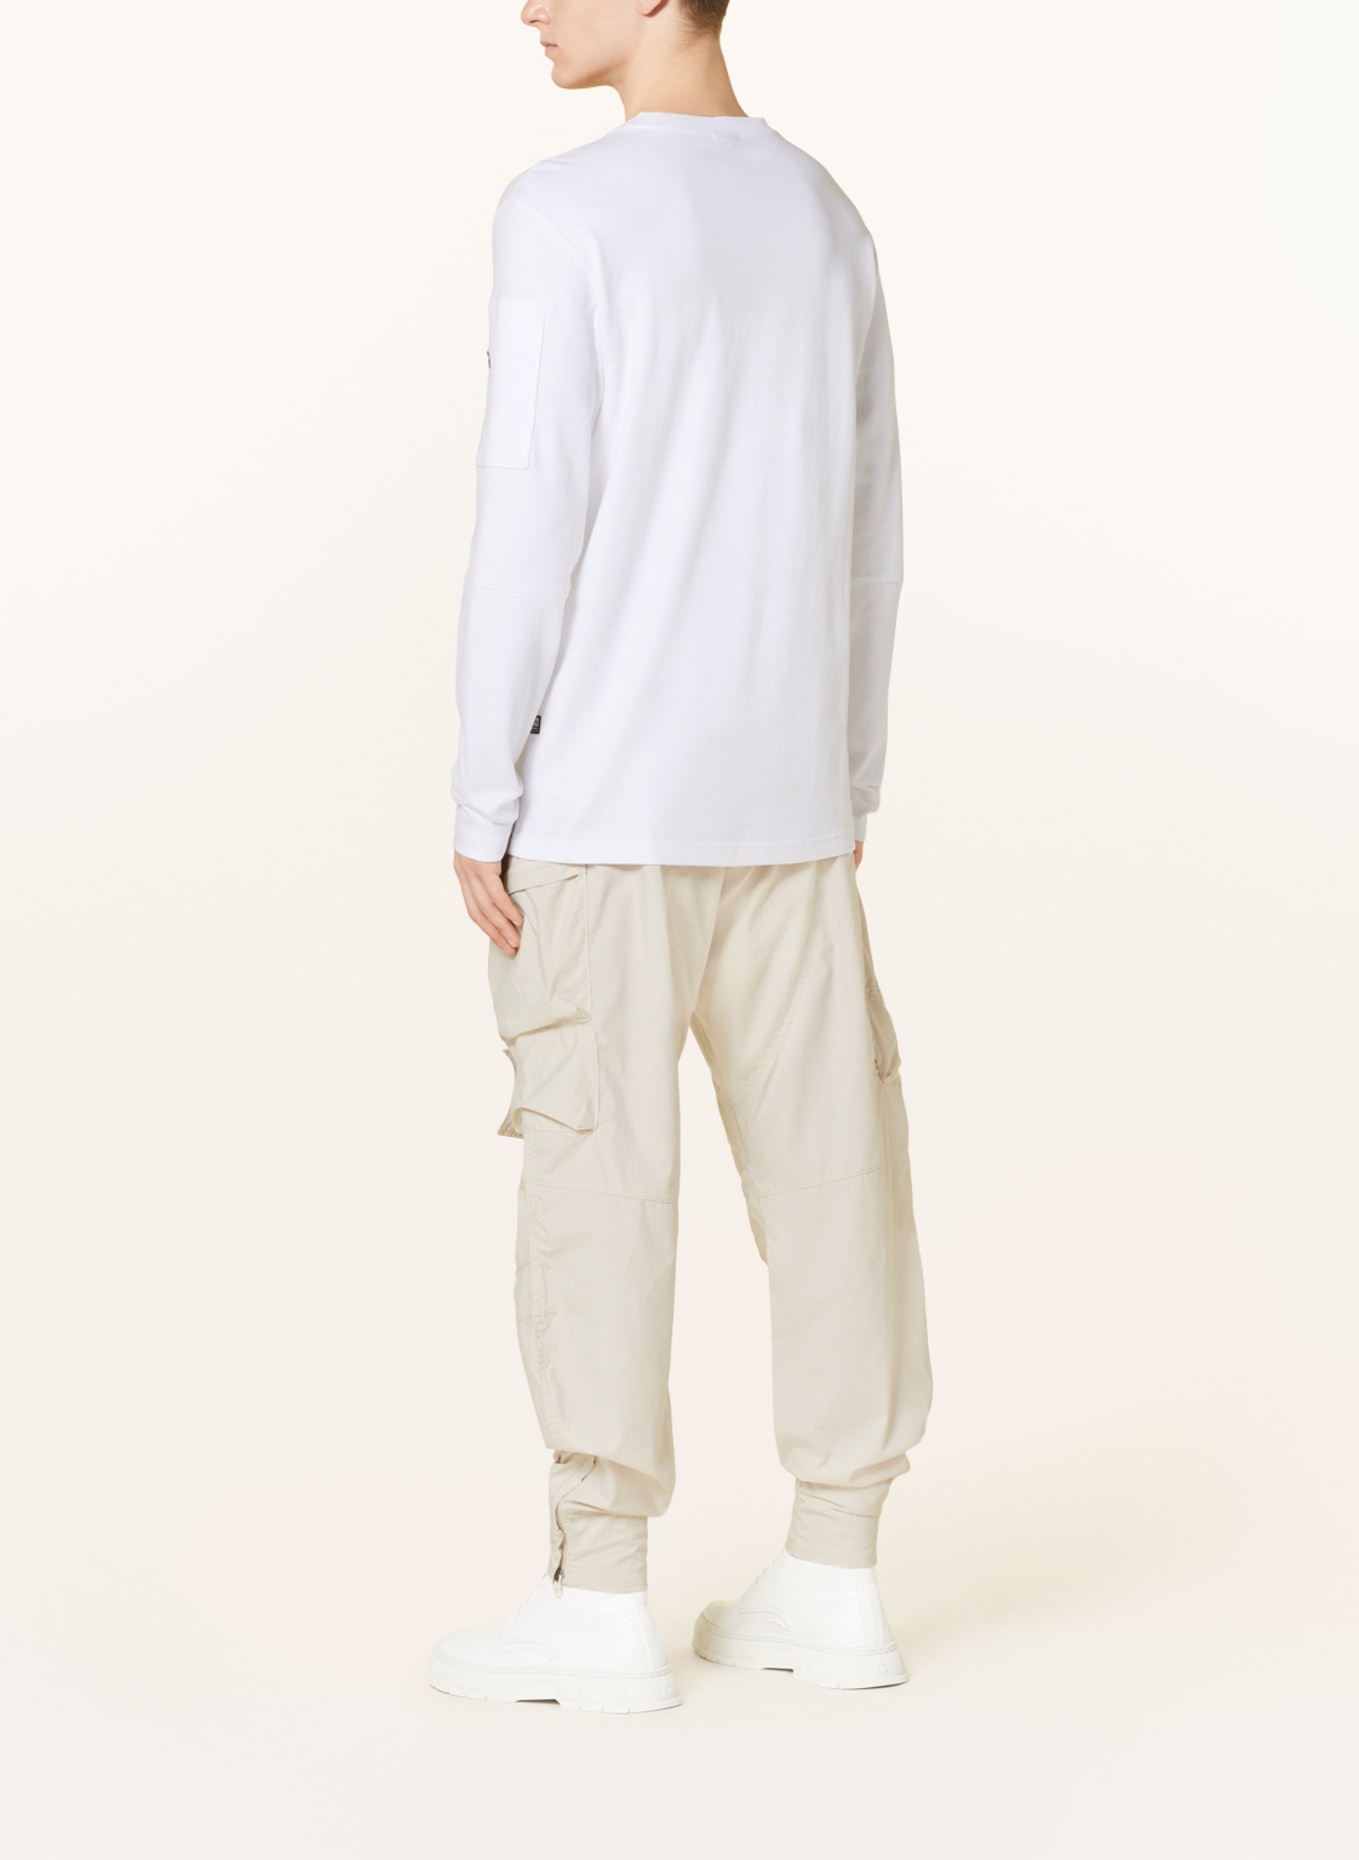 G-Star RAW Long sleeve shirt, Color: WHITE (Image 3)